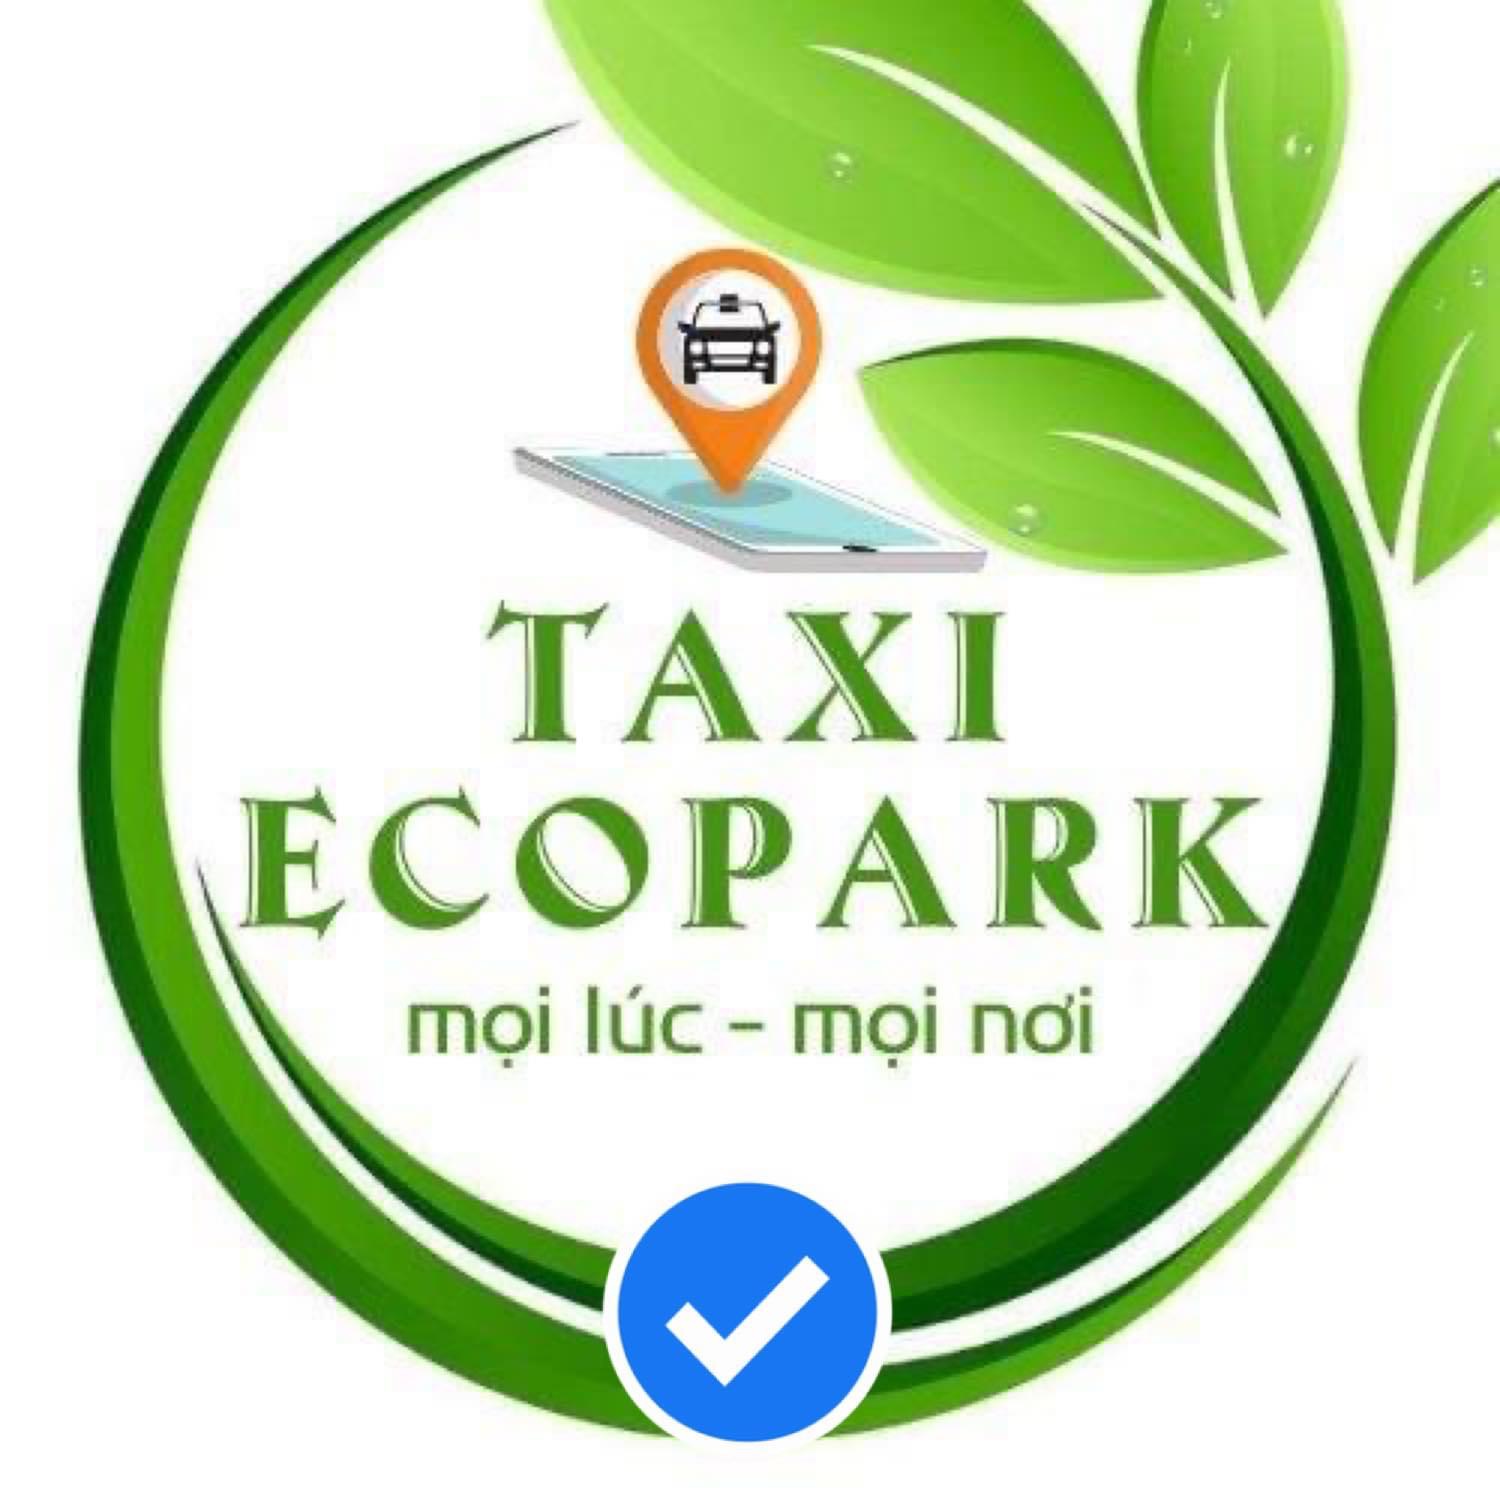 DỊCH VỤ TAXI ECOPARK